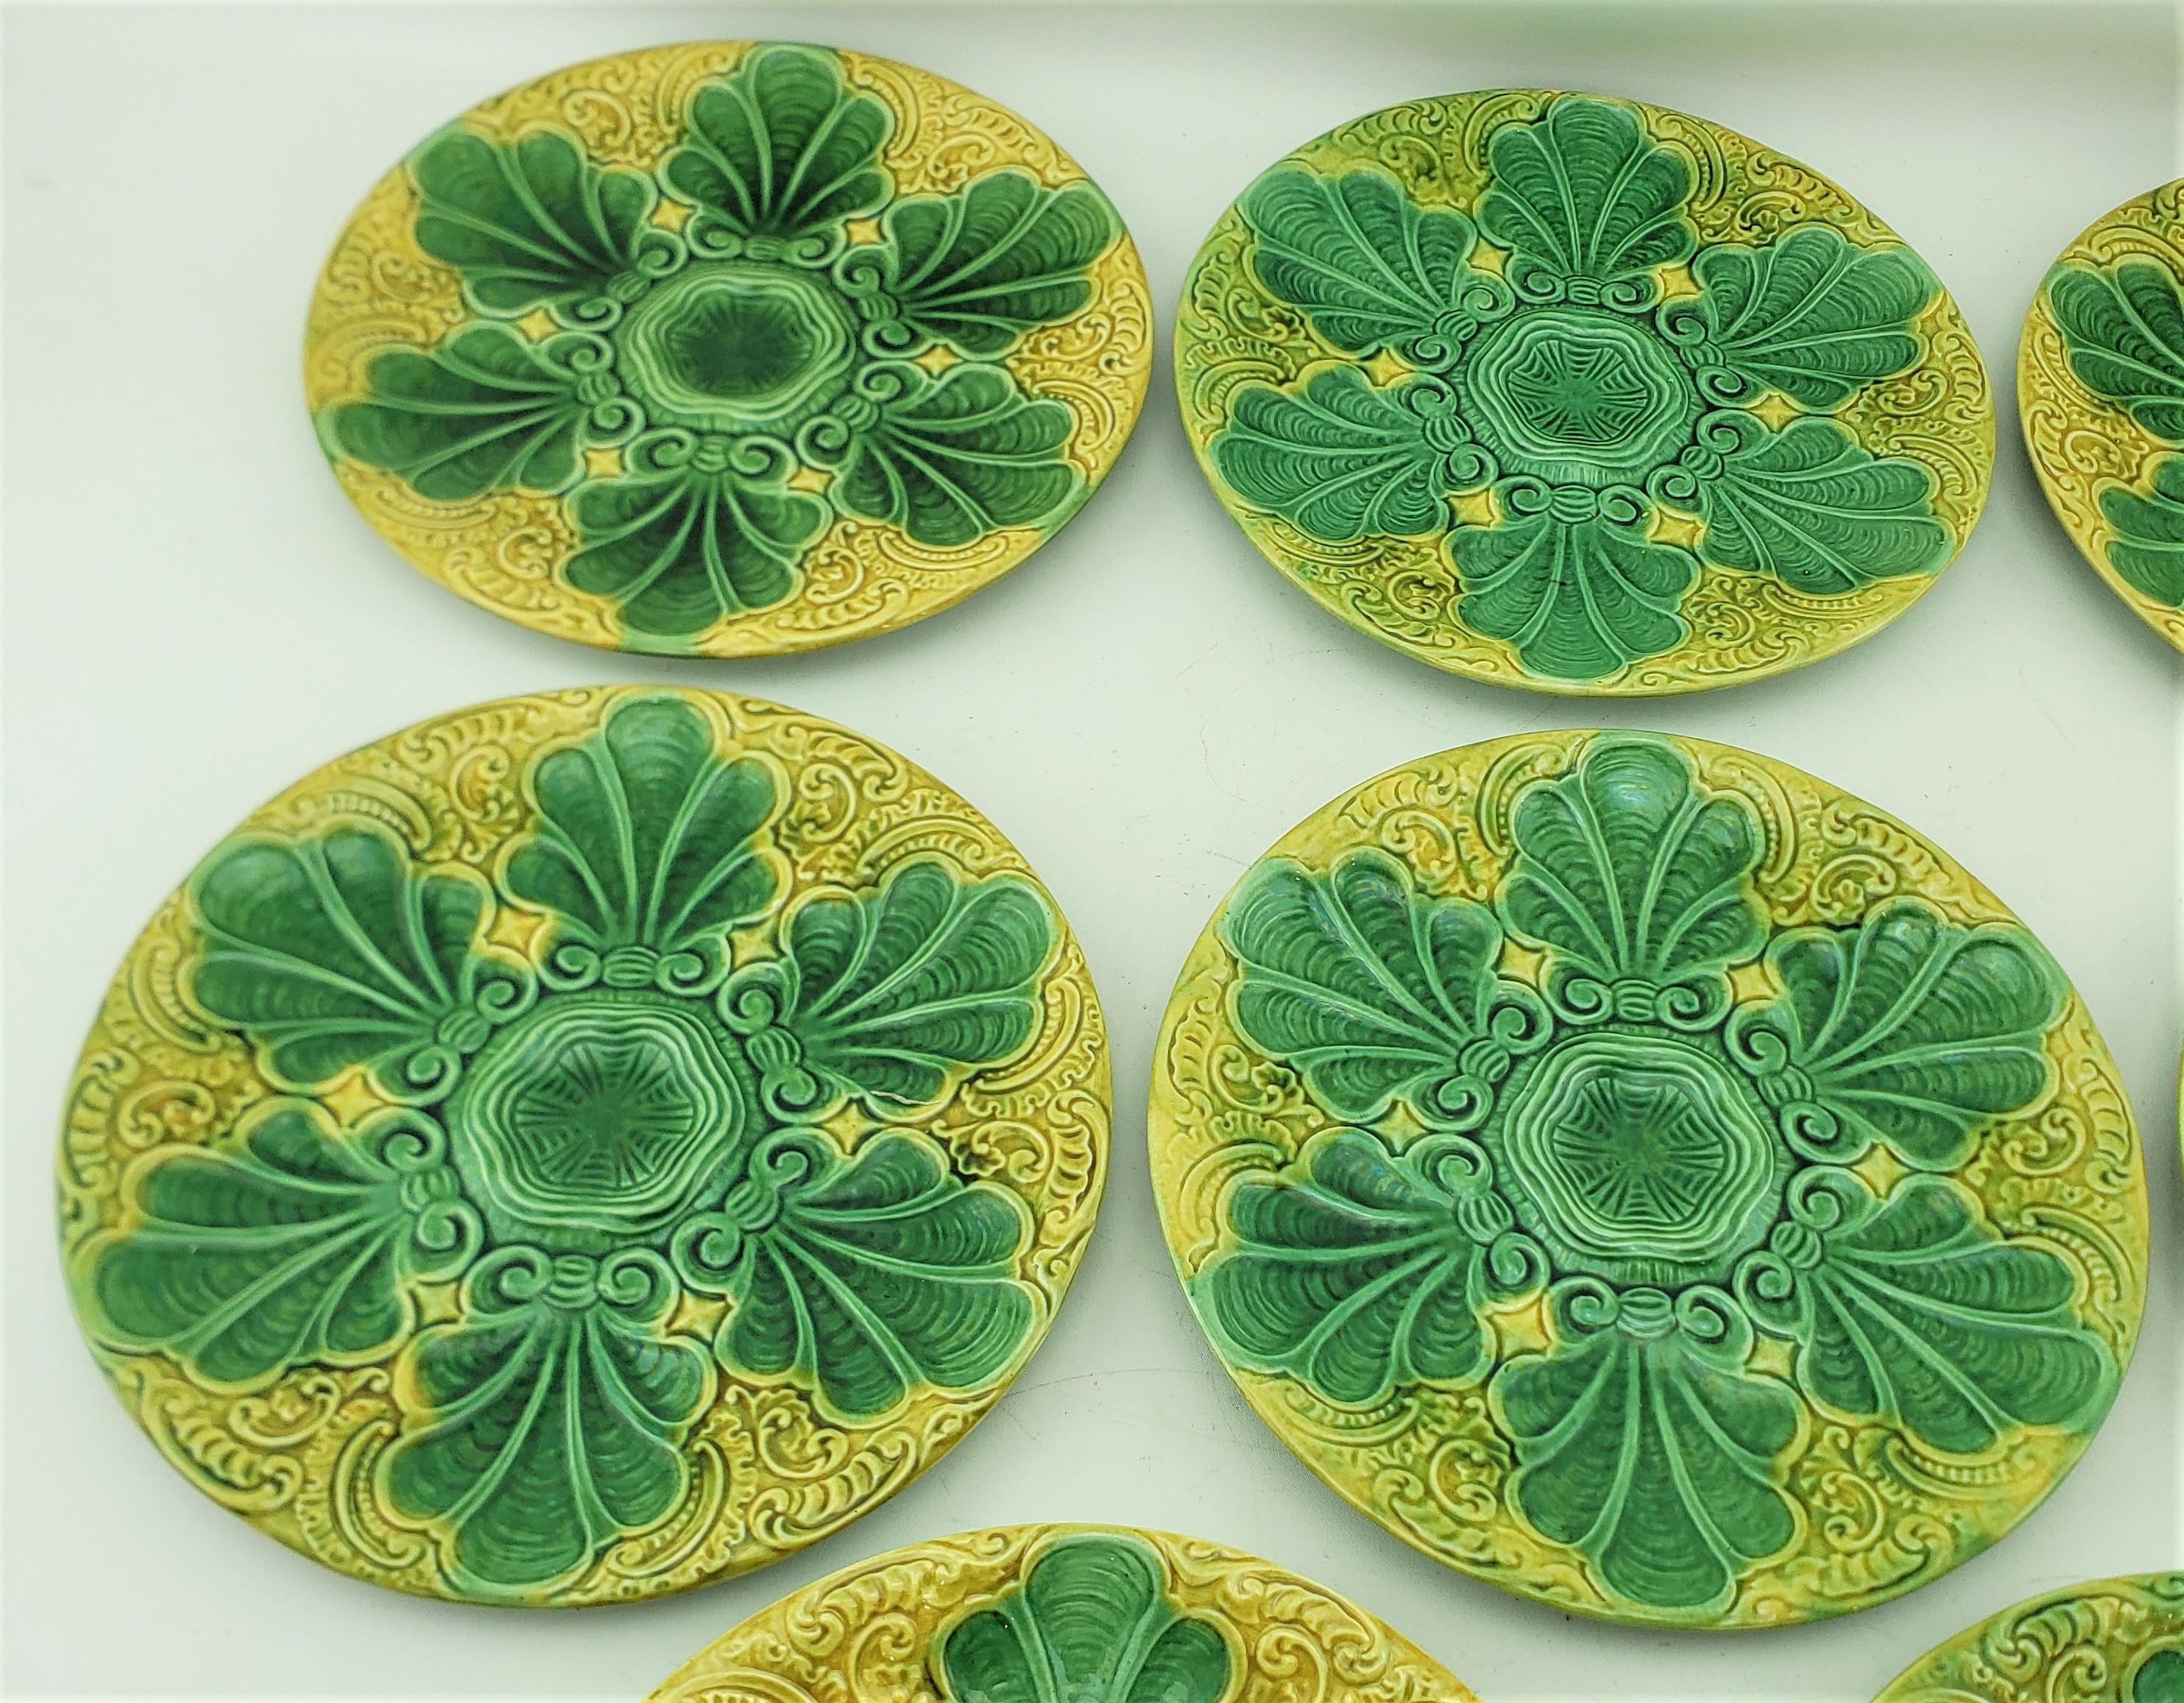 19th Century Antique French Majolica Oyster or Seafood Serving Plates Set, 8 Pieces For Sale